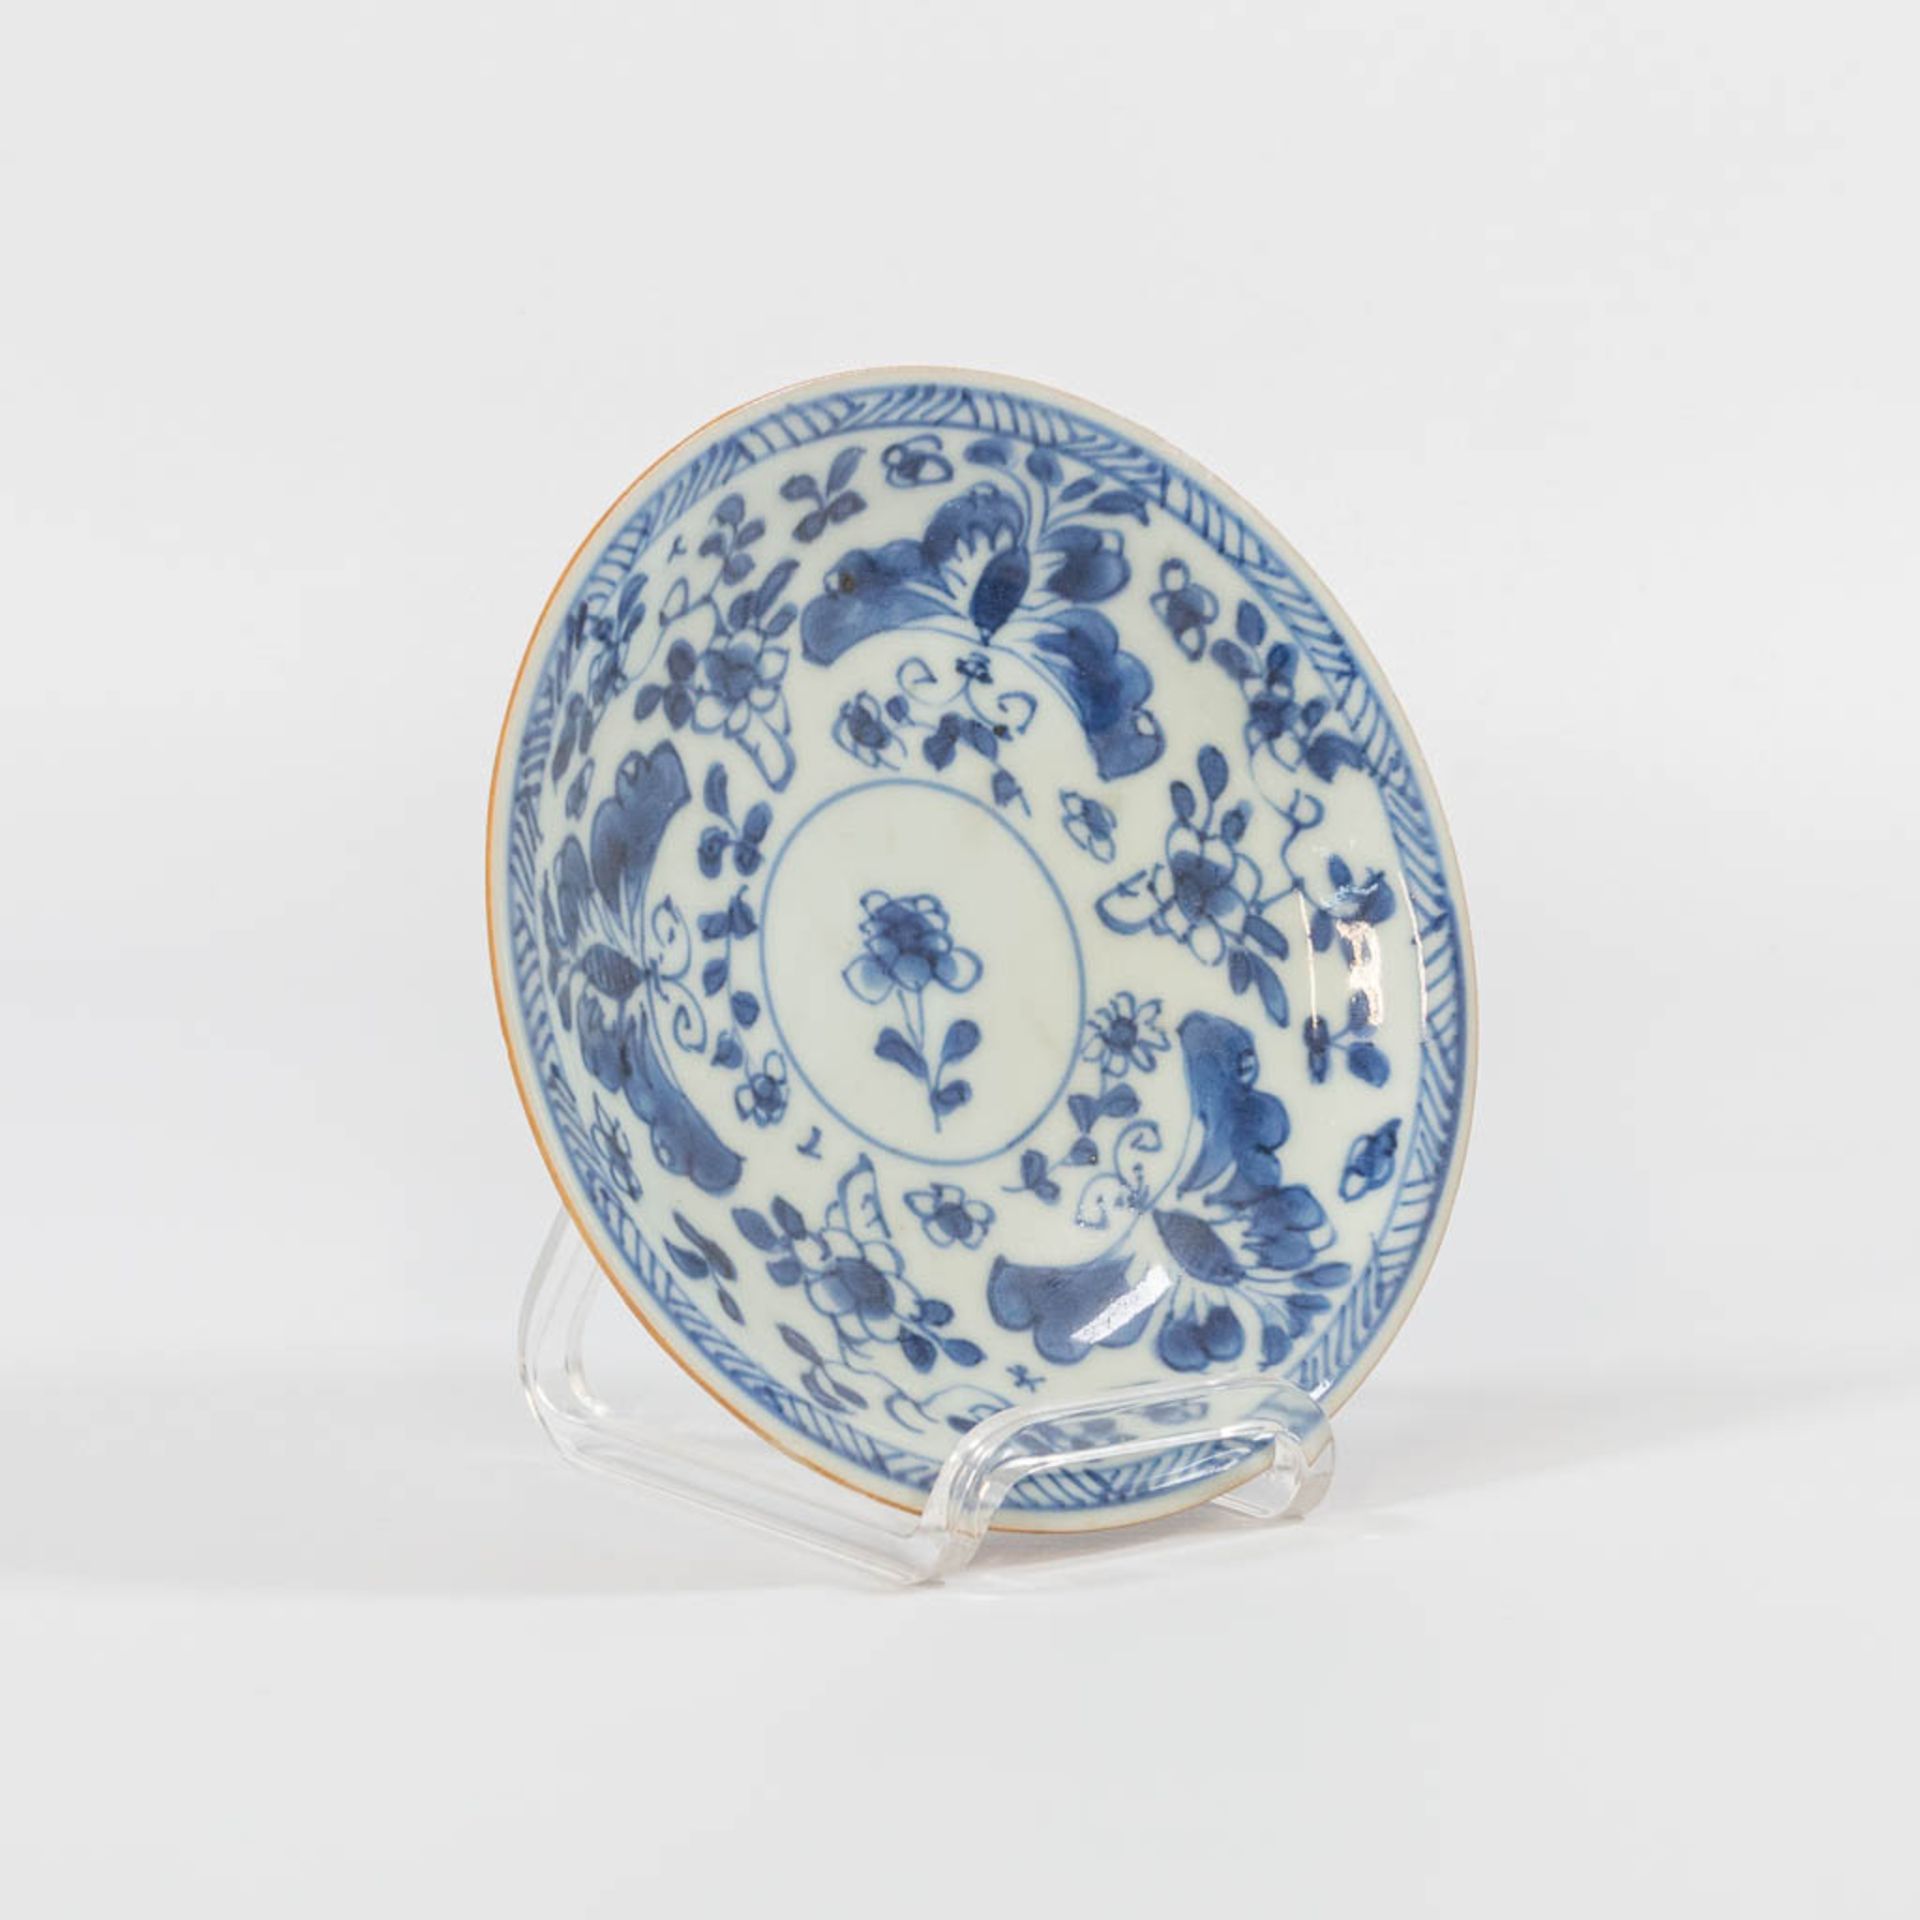 A collection of 12 Capucine Chinese porcelain items, consisting of 5 plates and 7 cups. - Image 18 of 26